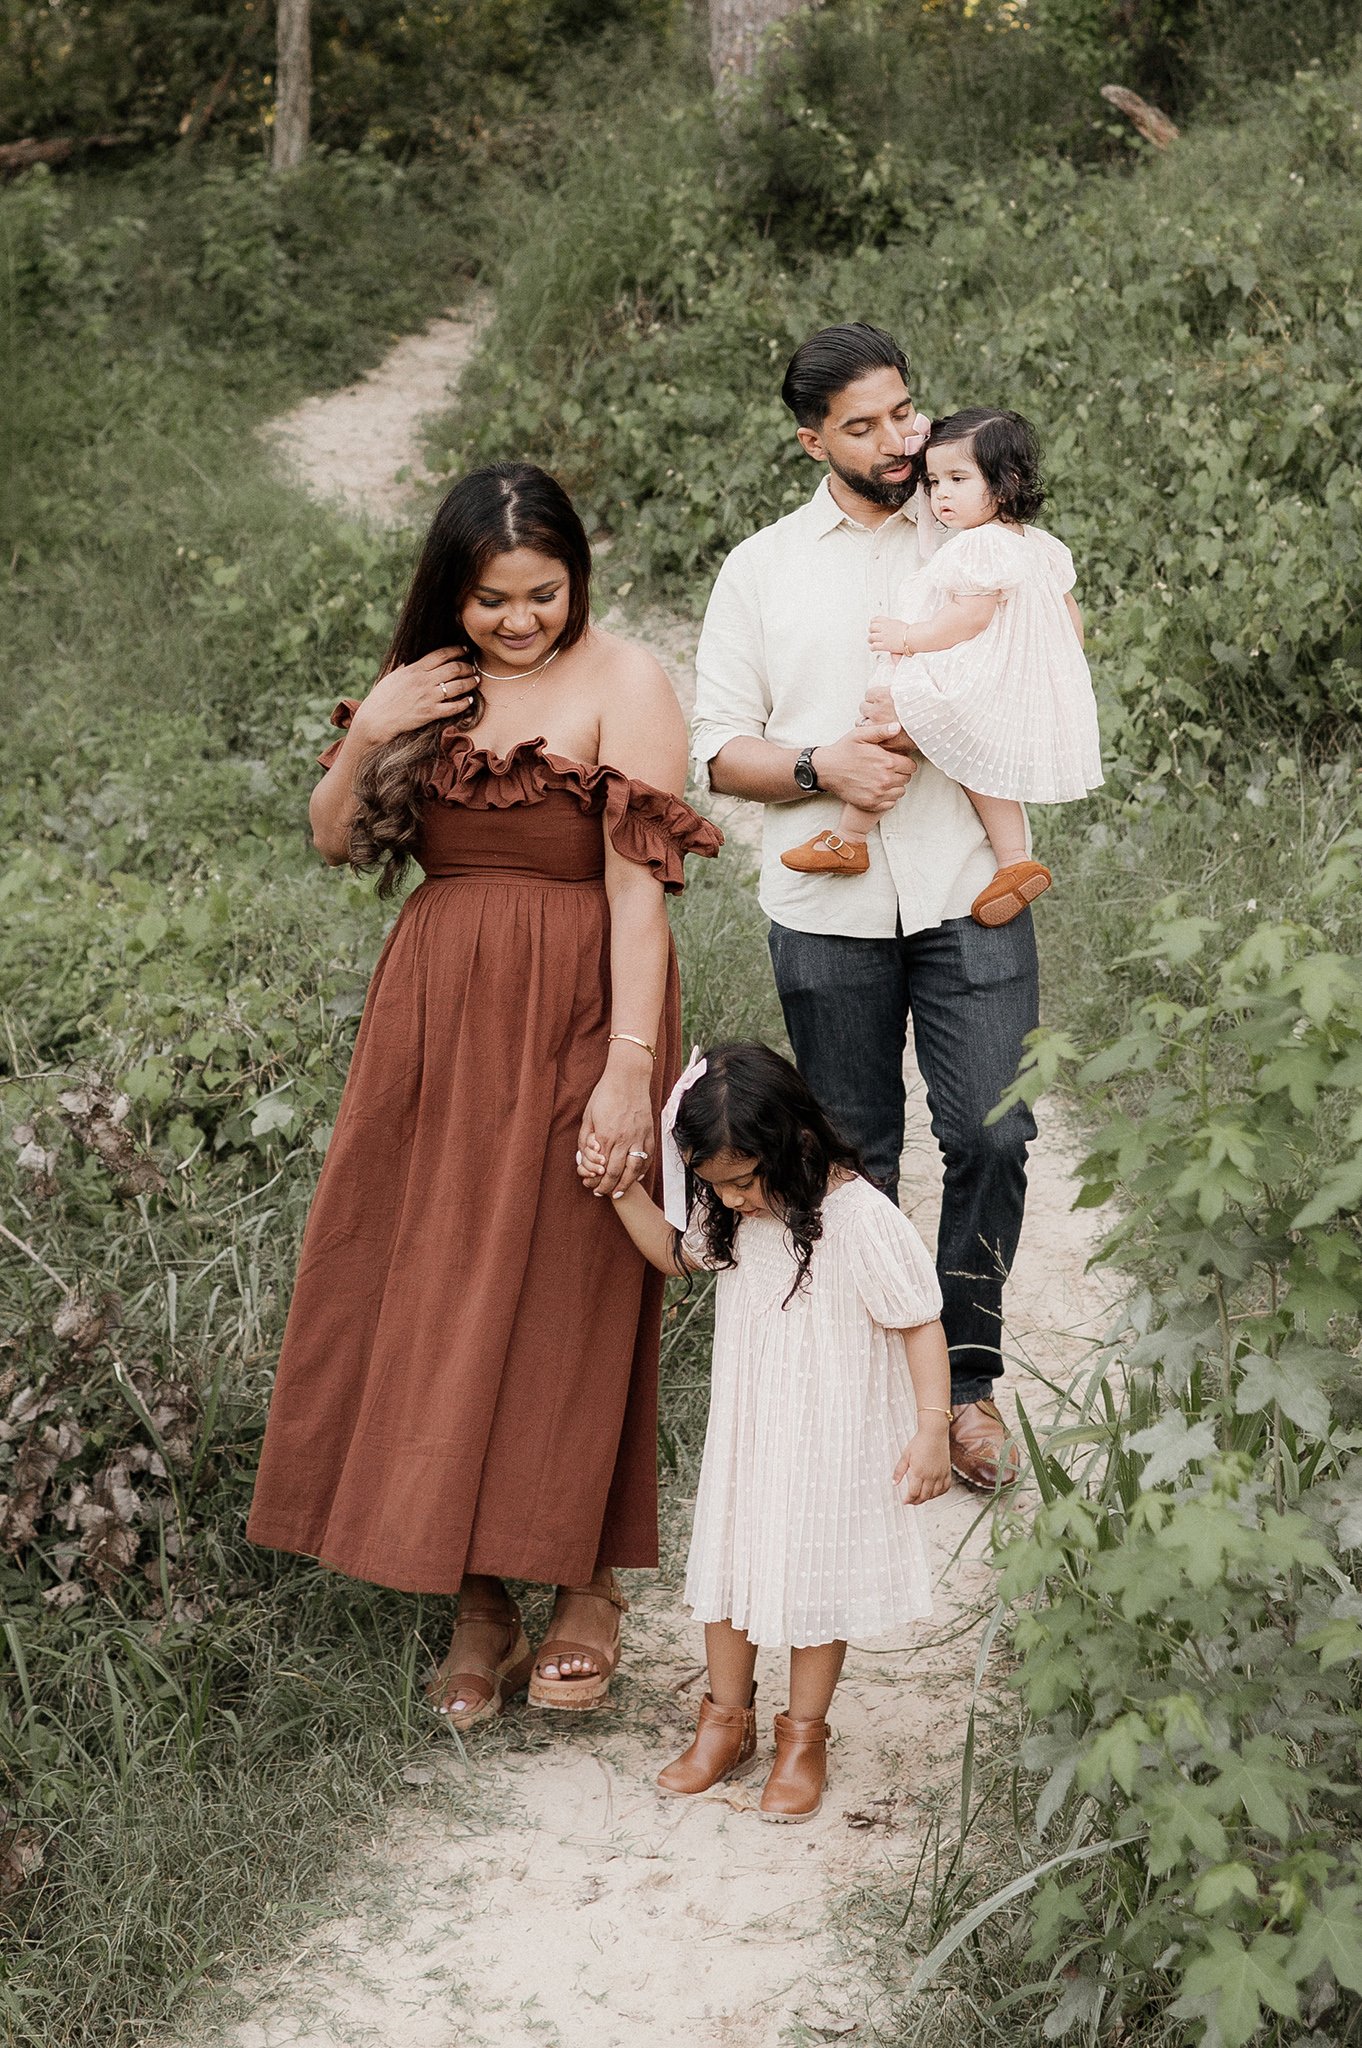 the woodlands family photographer _ conroe photographer _ houston family photographer _ ashley gillen photography _ texas family photographer _ conroe wedding photographer _ conroe texas _ cshi2.jpg